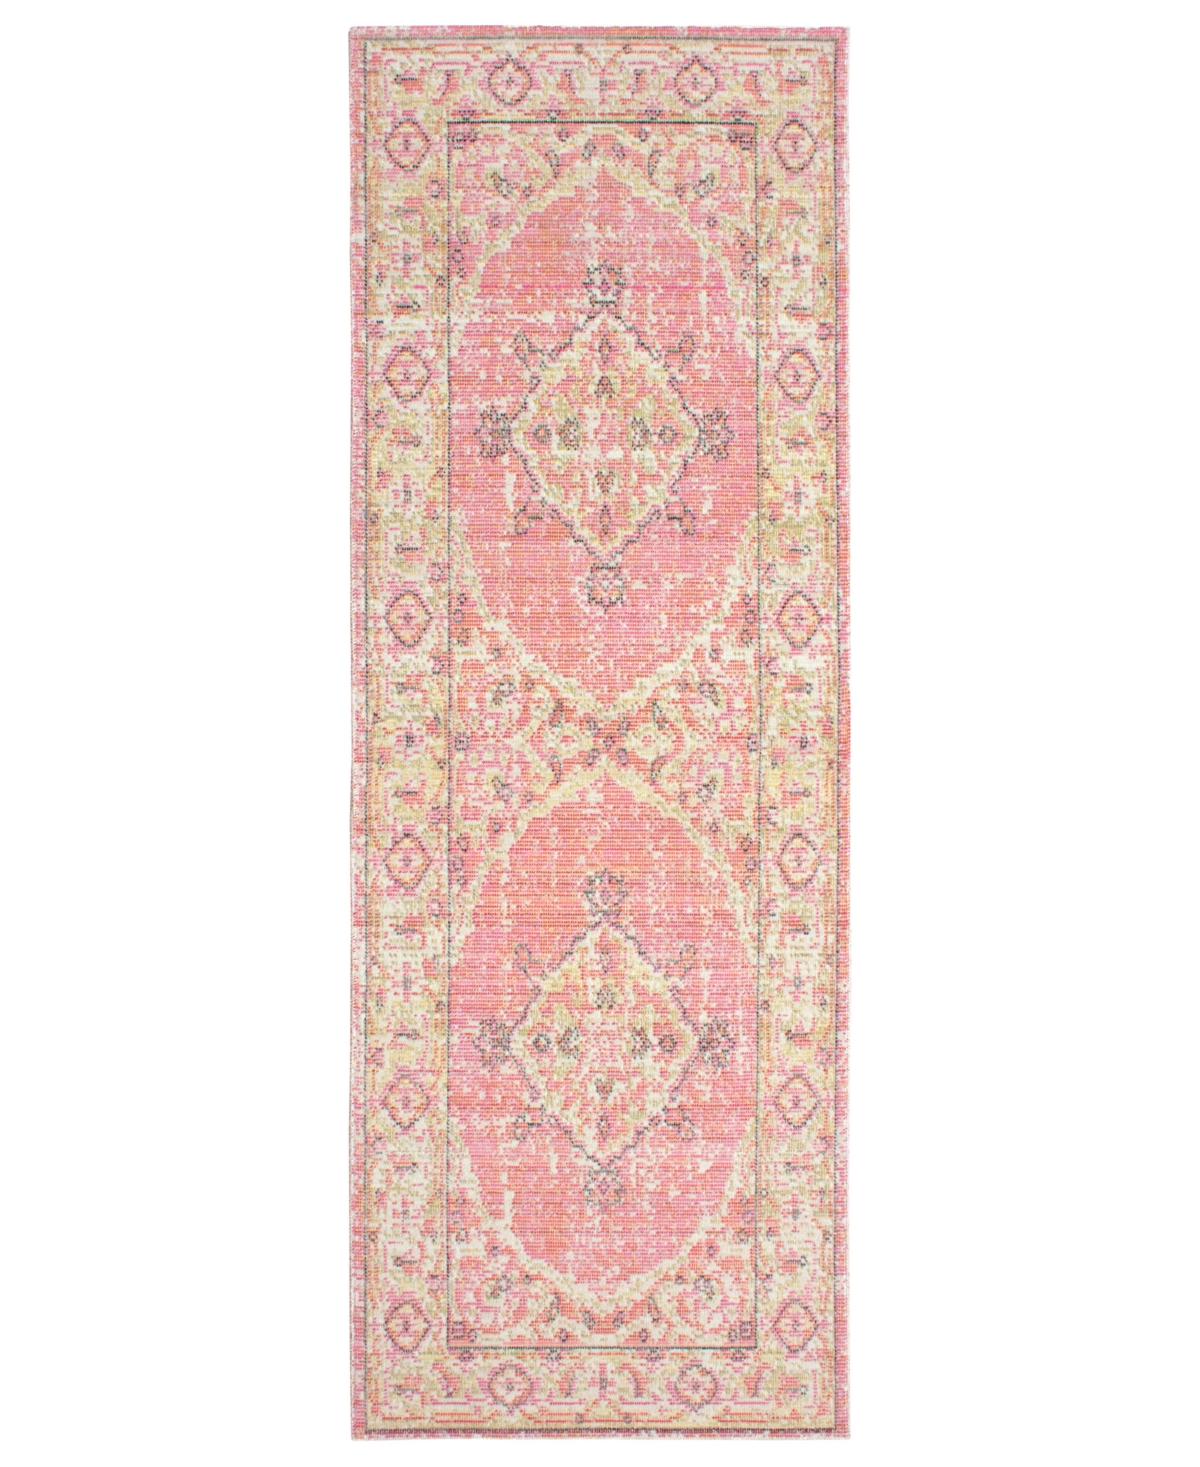 French Connection Kenora Colorwashed Kilim 22" X 61" Accent Rug Bedding In Pink,pink